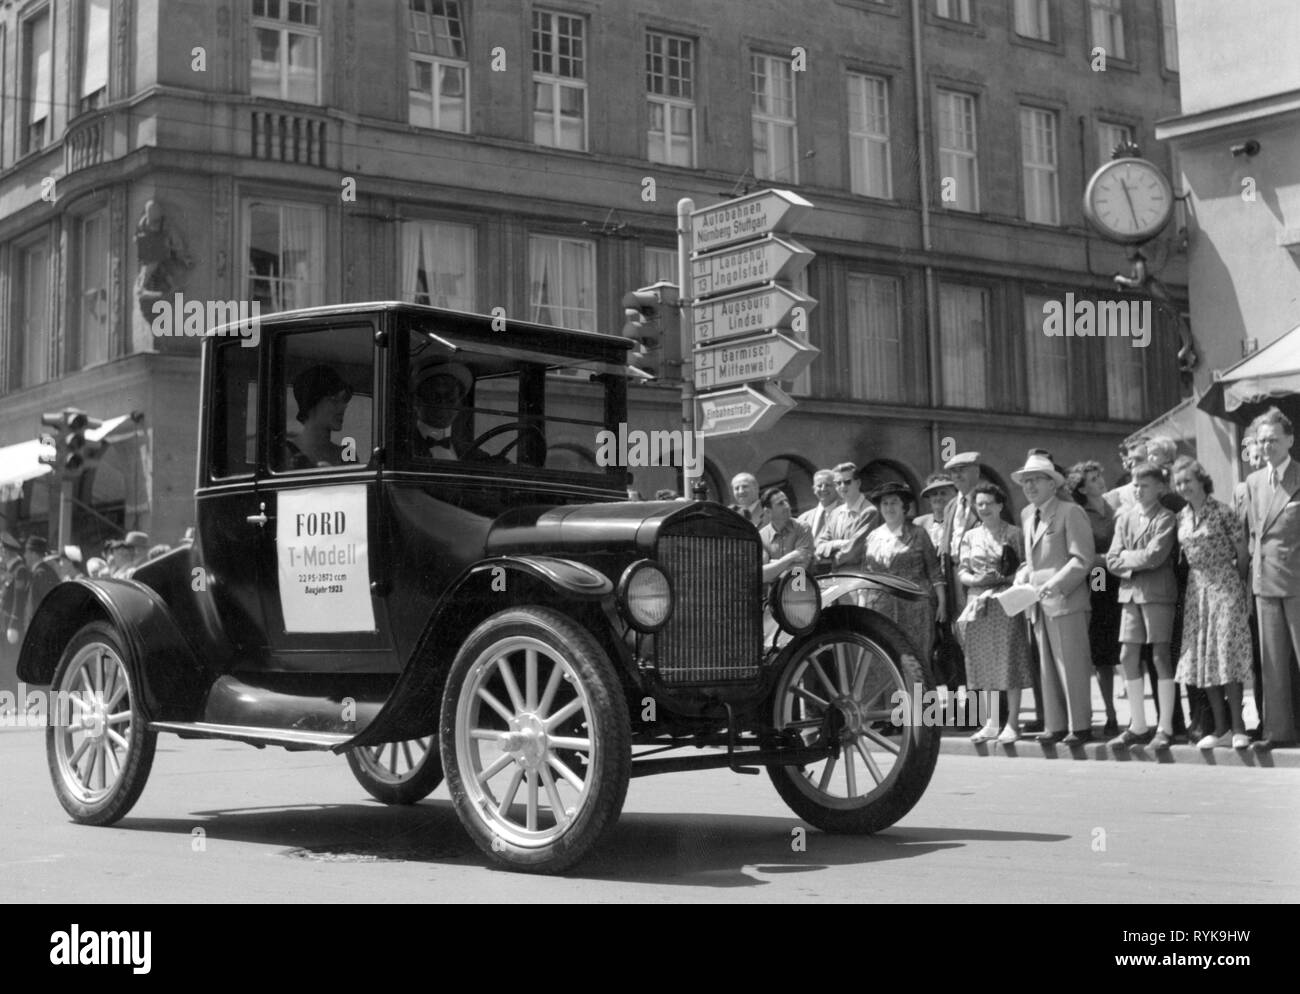 transport / transportation, cars, vehicle variants, Ford Model T 1923, at a vintage car parade, Munich, 1959, Tin Lizzie, street, streets, motor car, auto, automobile, passenger car, motorcar, motorcars, autos, automobiles, passenger cars, vehicle, vehicles, small car, coupe, vintage car, vintage cars, parades, military parade, West Germany, Western Germany, Germany, 1920s, 20s, 1950s, 50s, 20th century, people, transport, transportation, cars, car, historic, historical, Additional-Rights-Clearance-Info-Not-Available Stock Photo